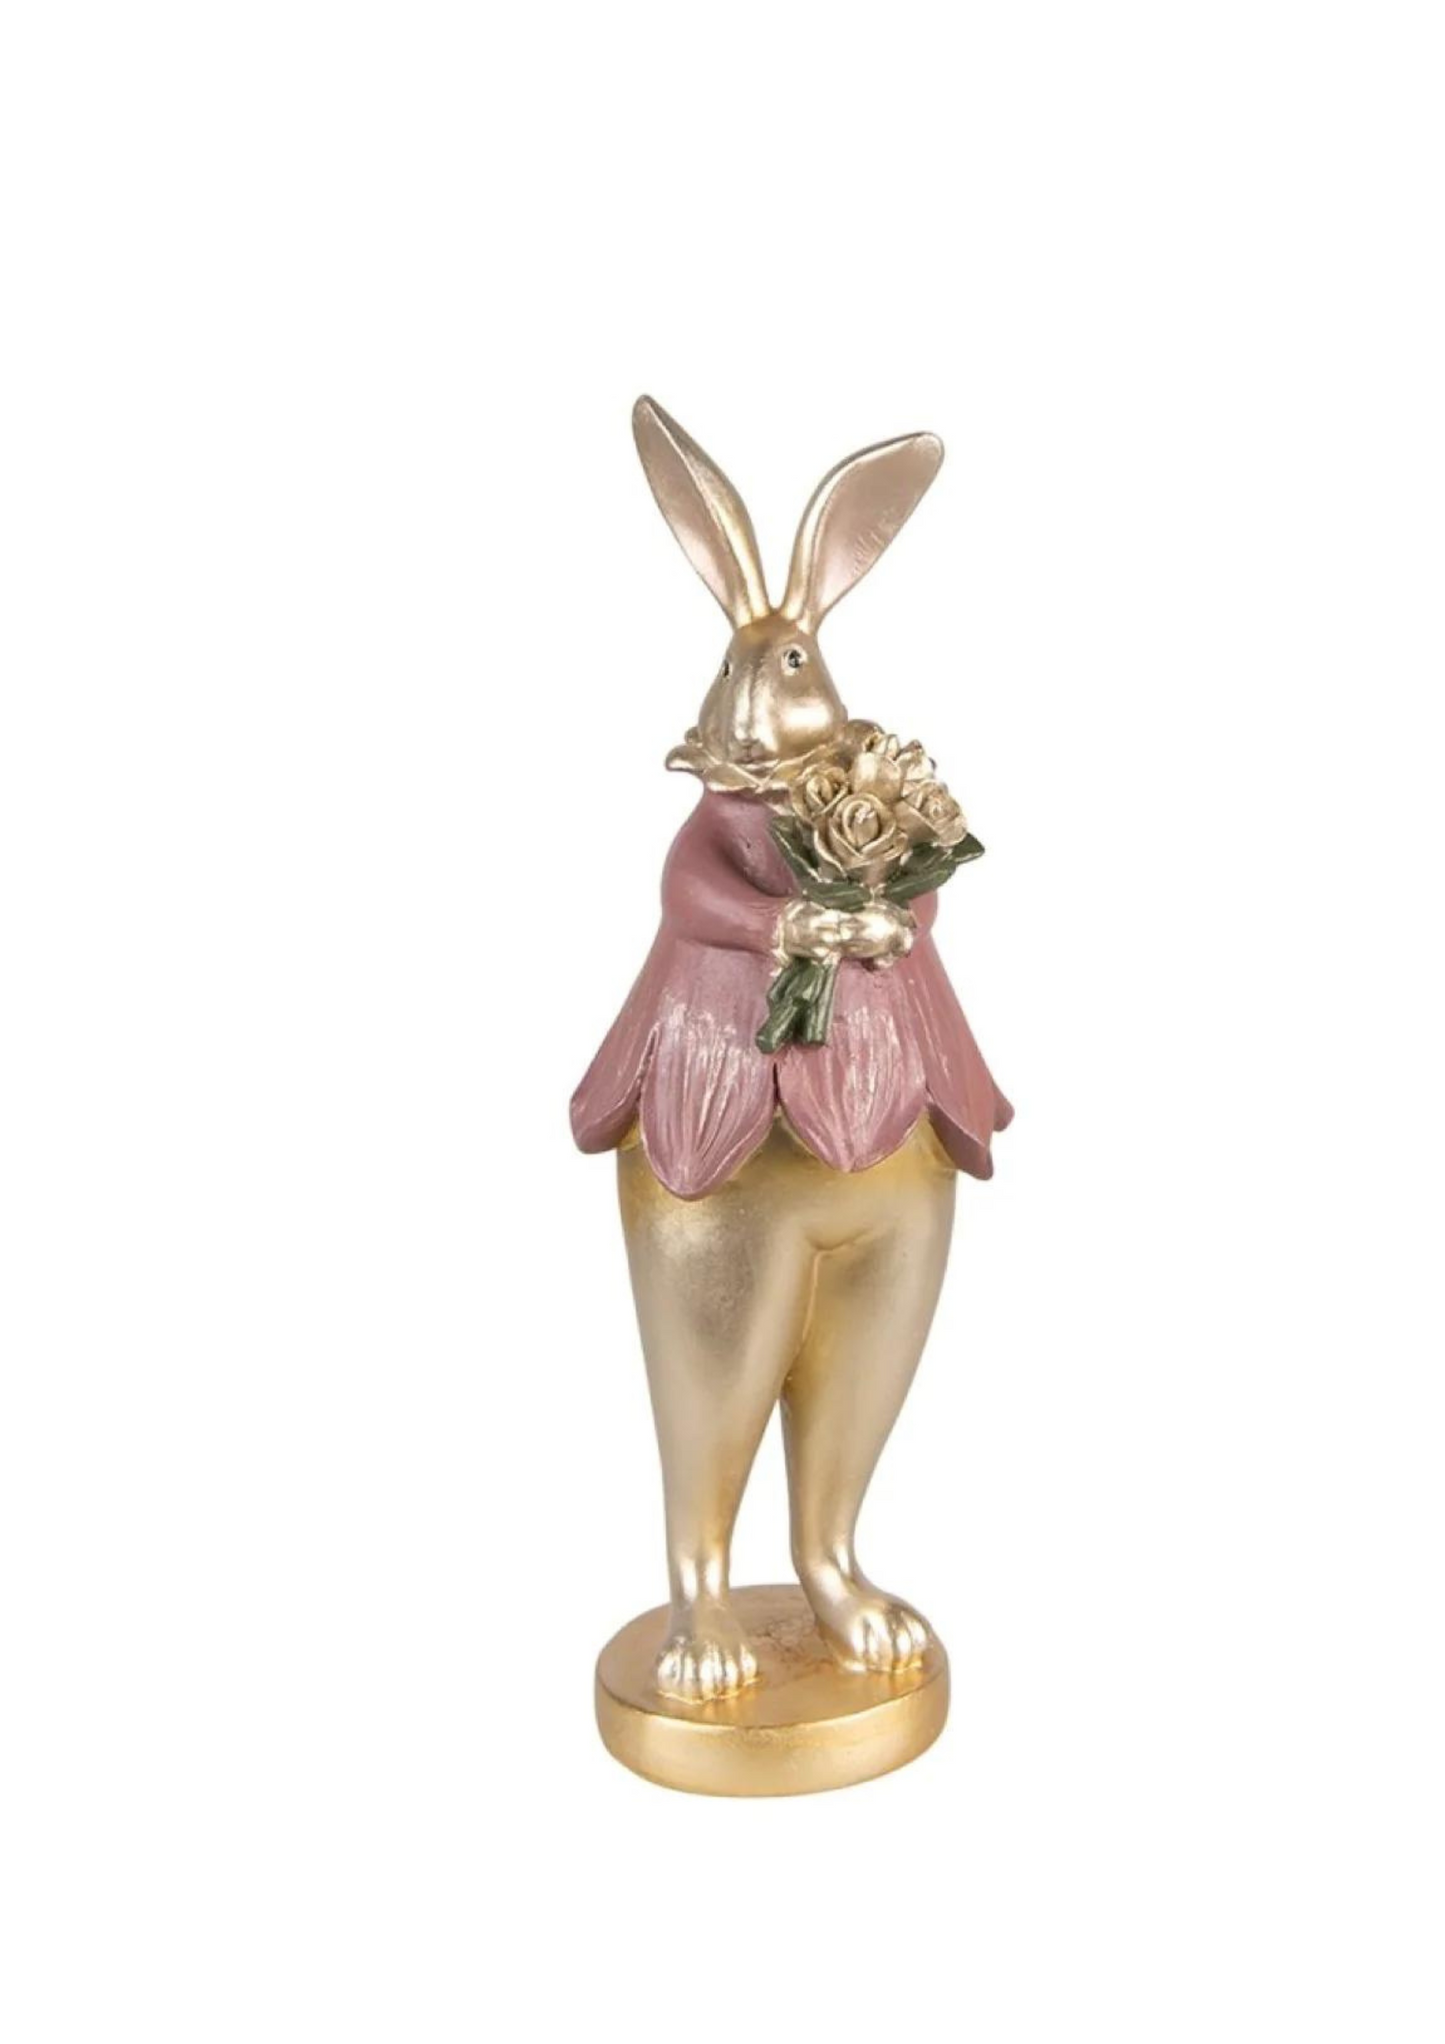 Bunny statue with pink dress